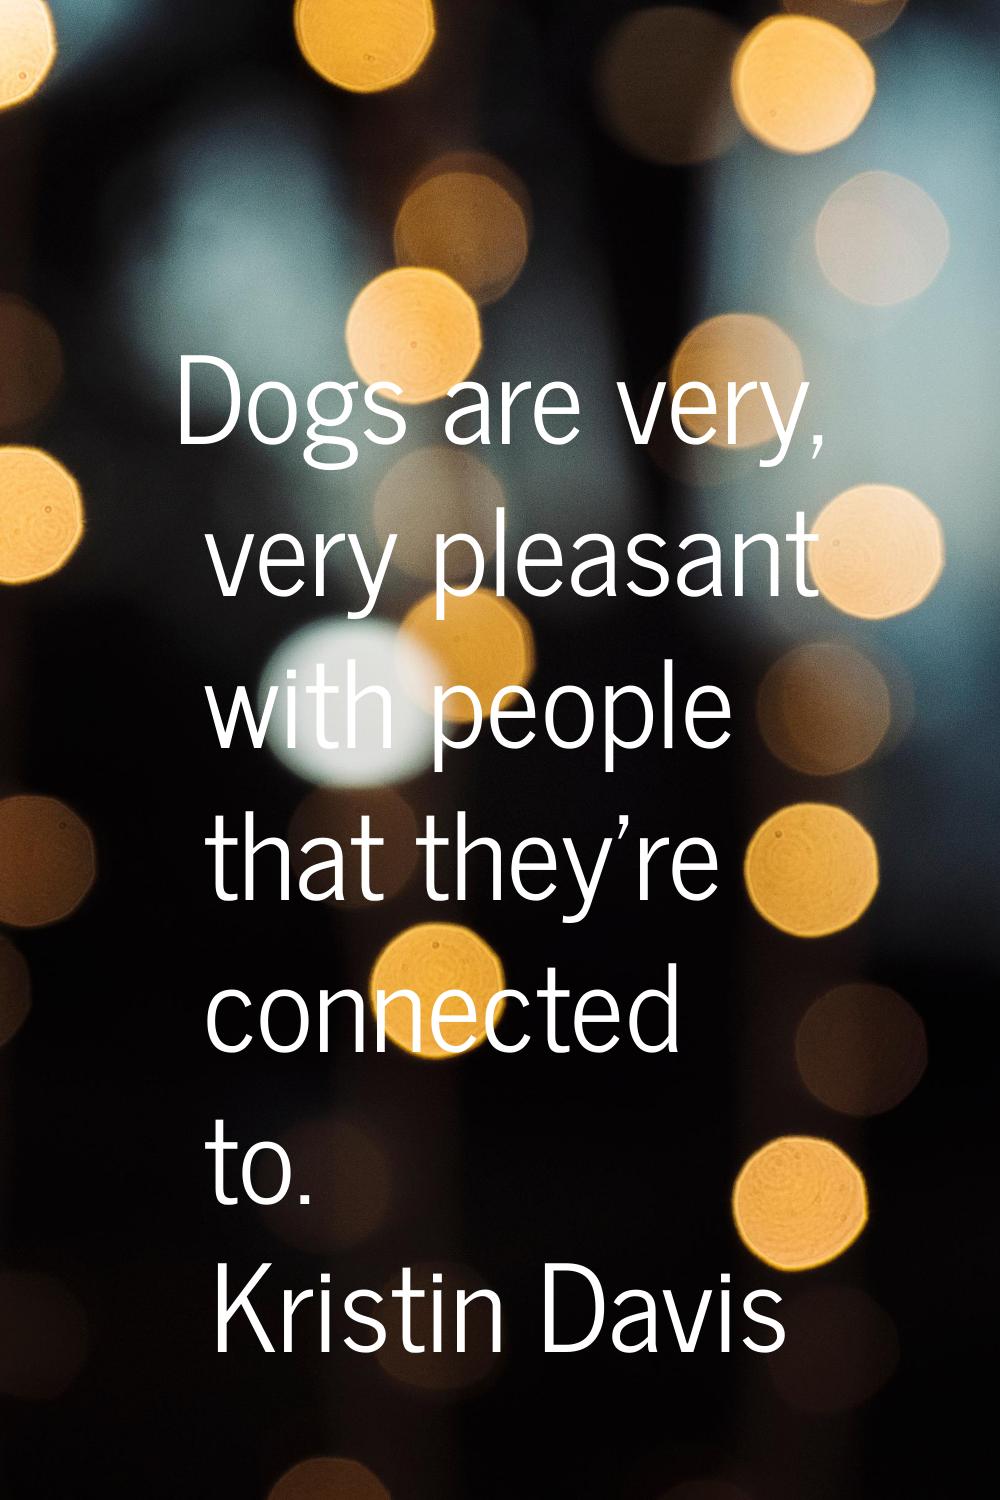 Dogs are very, very pleasant with people that they're connected to.